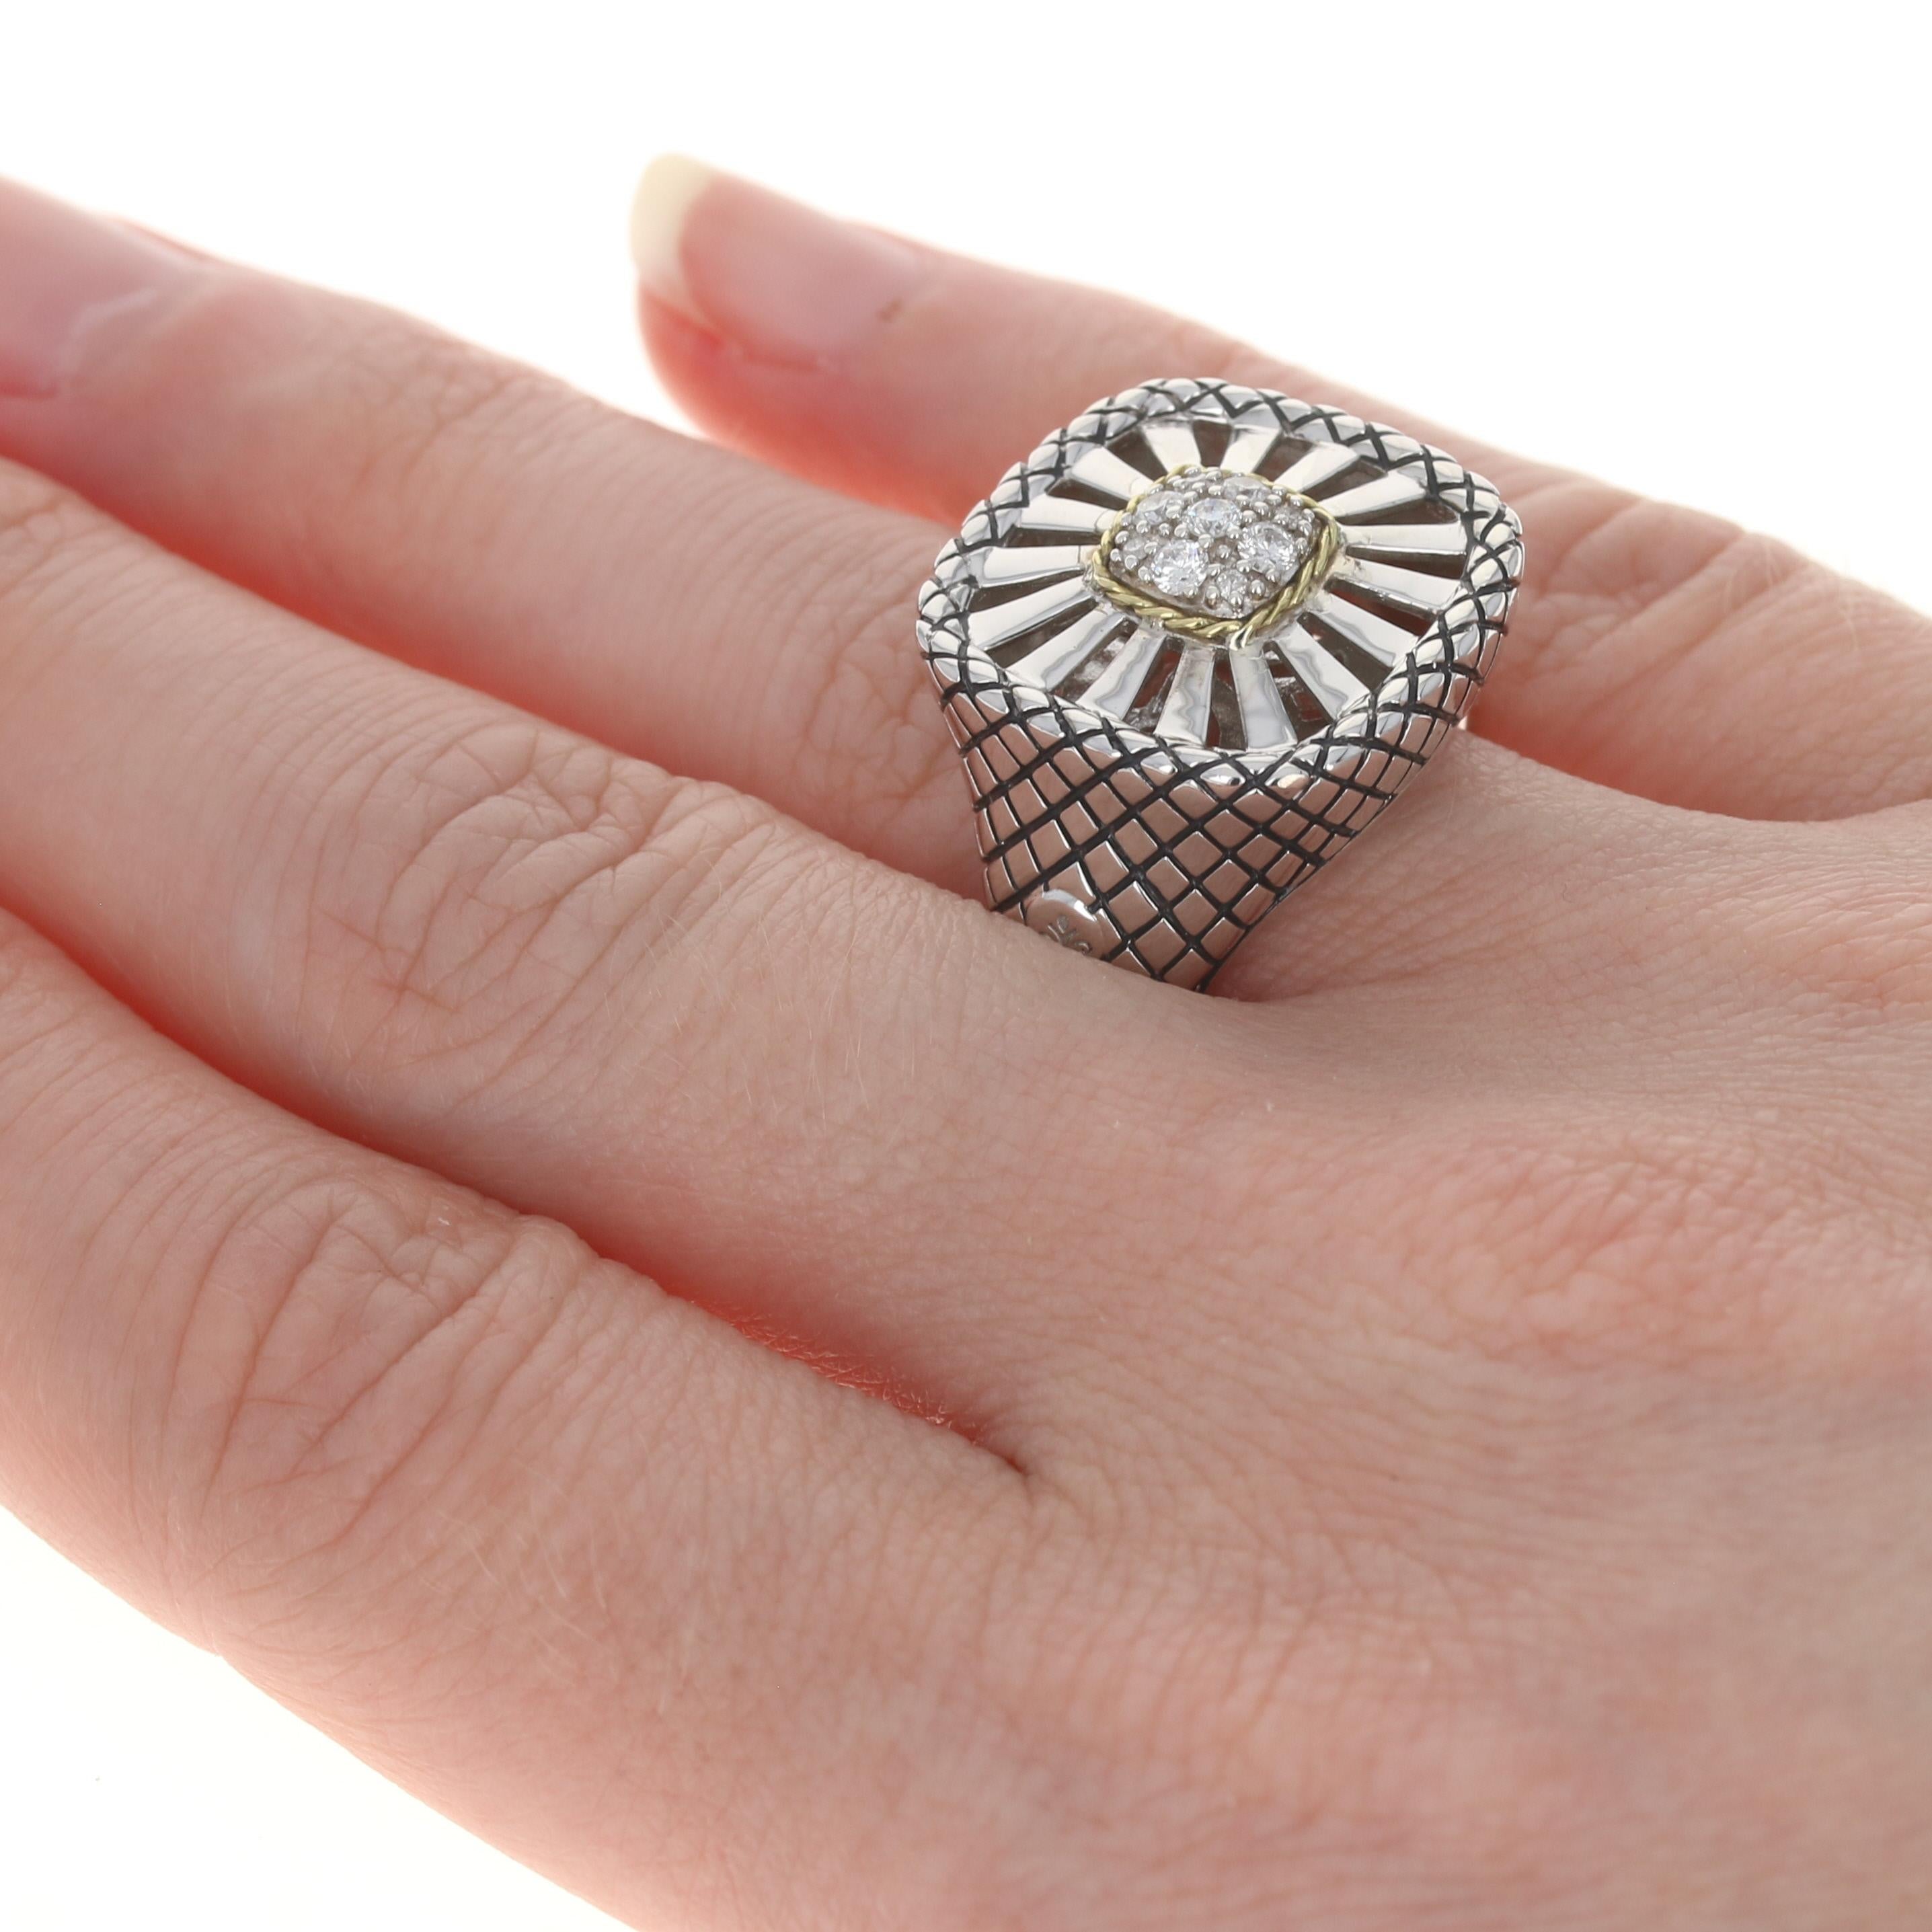 For Sale:  New Candela Diamante Ring, Sterling Silver & 18k Gold Diamonds ACR241/20 4